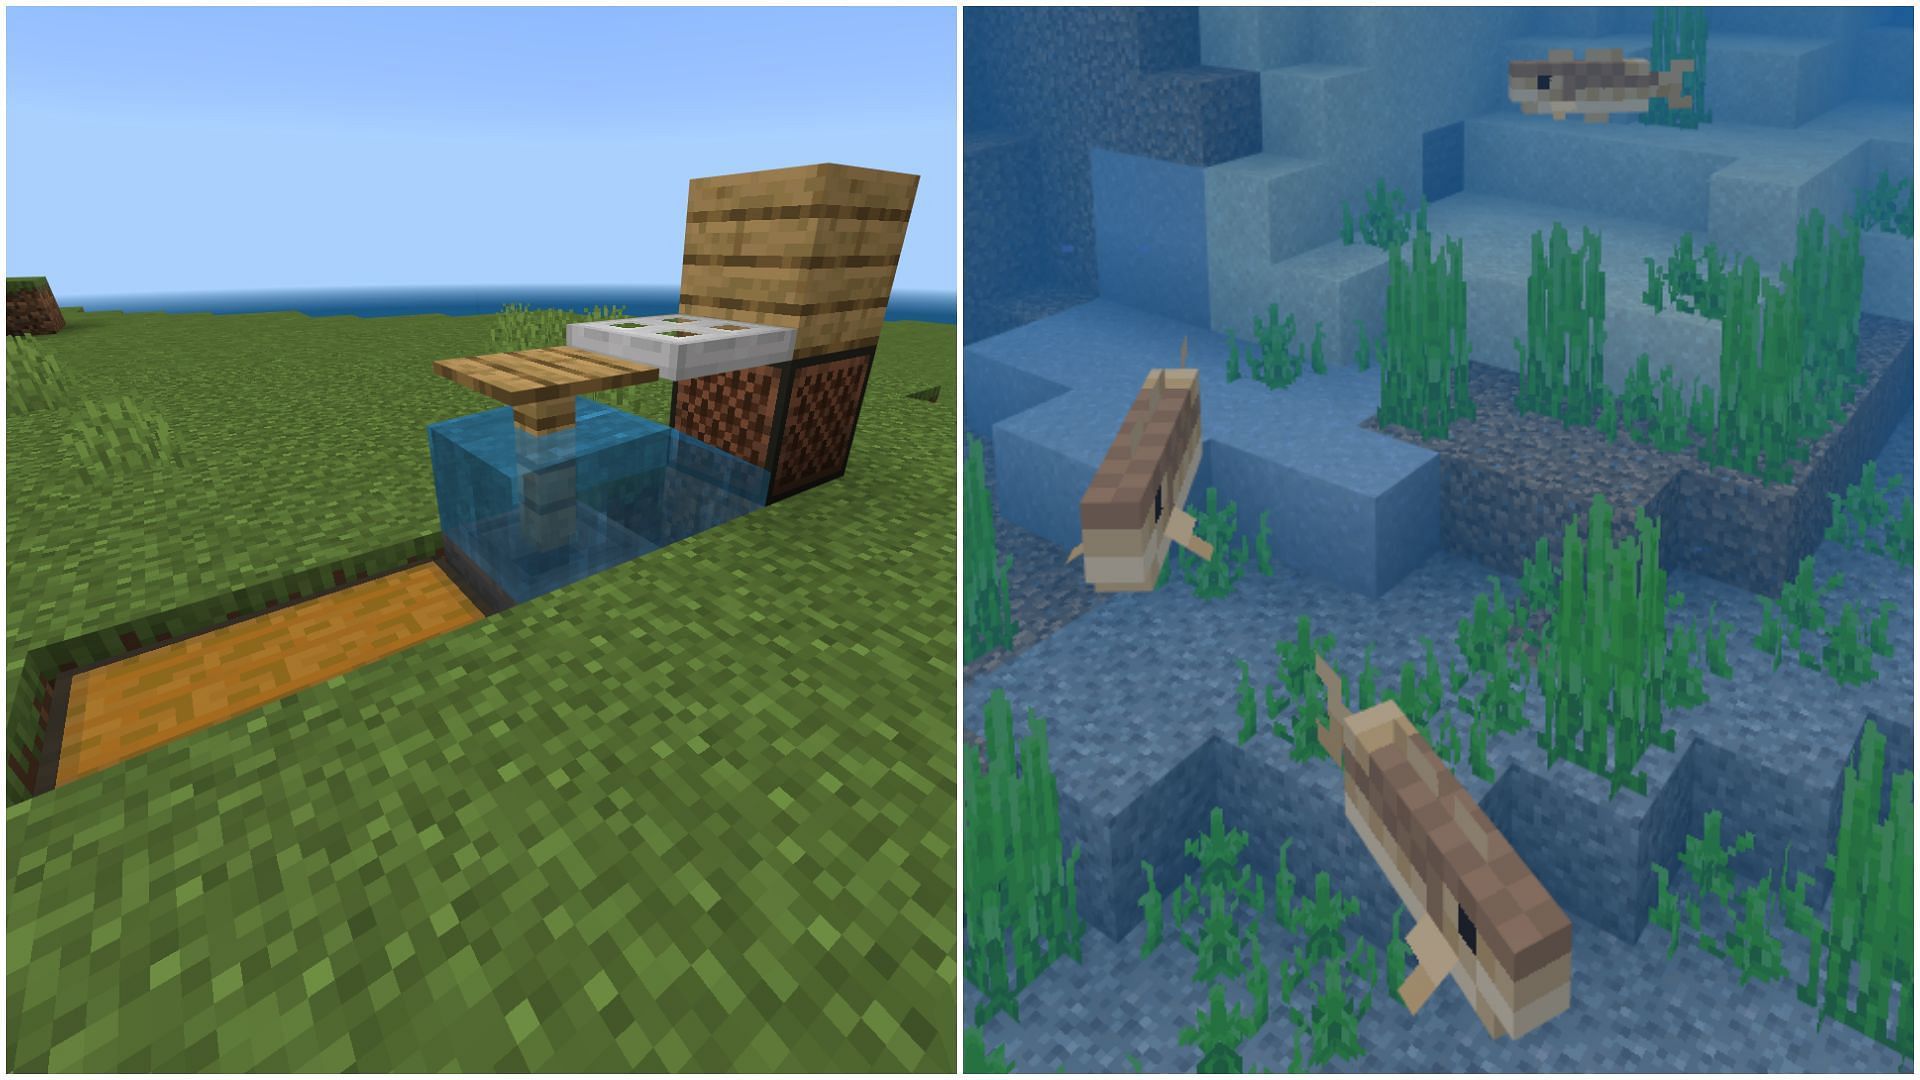 AFK farm can be made using an autoclicker in Minecraft Bedrock (Image via Mojang Studios)